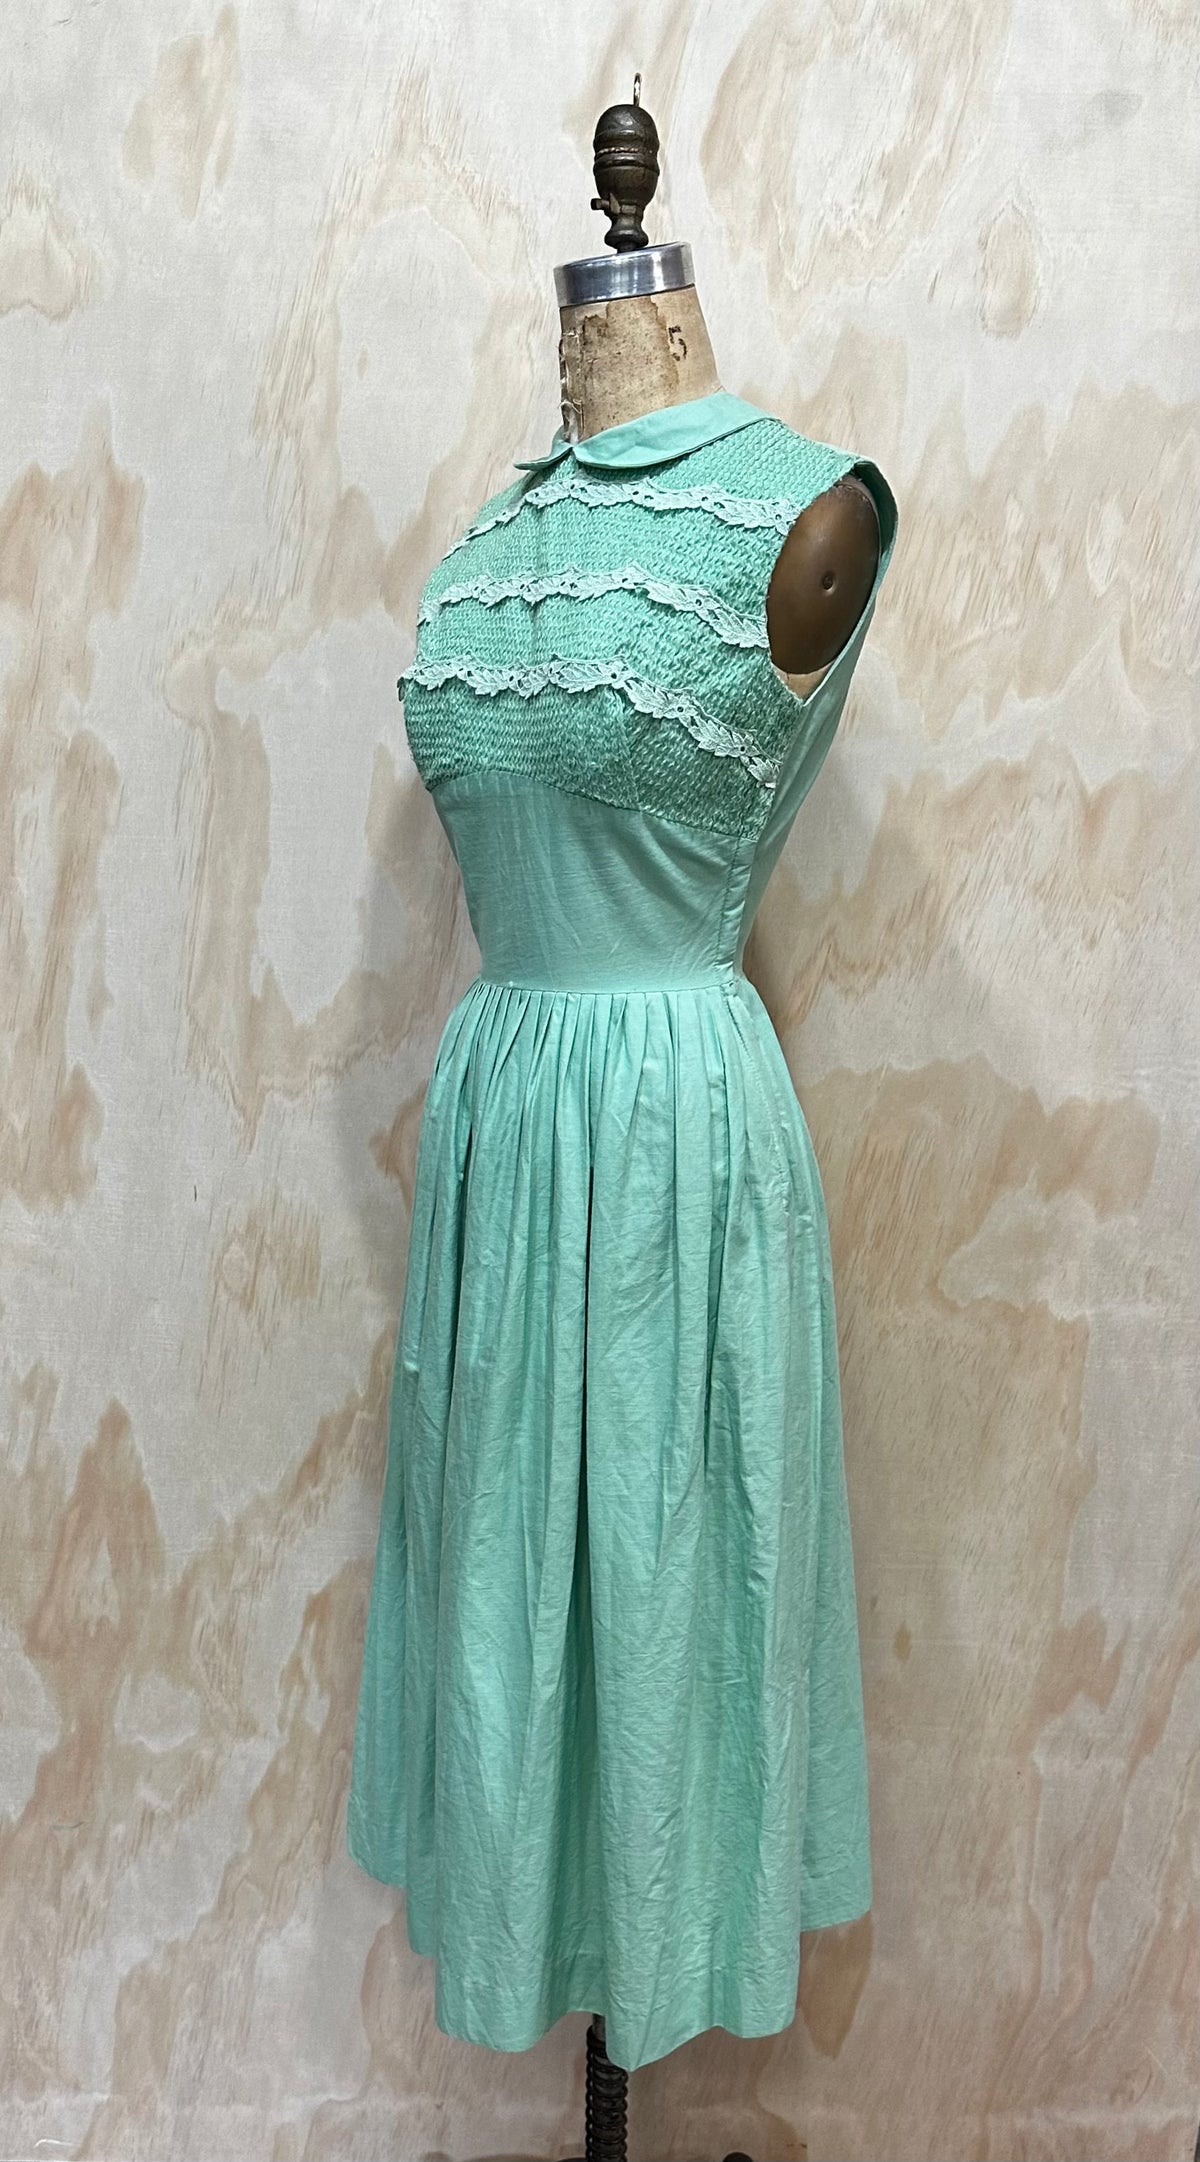 Vintage 1950's Mint Green Dress Party Dress 50s Fit and Flare